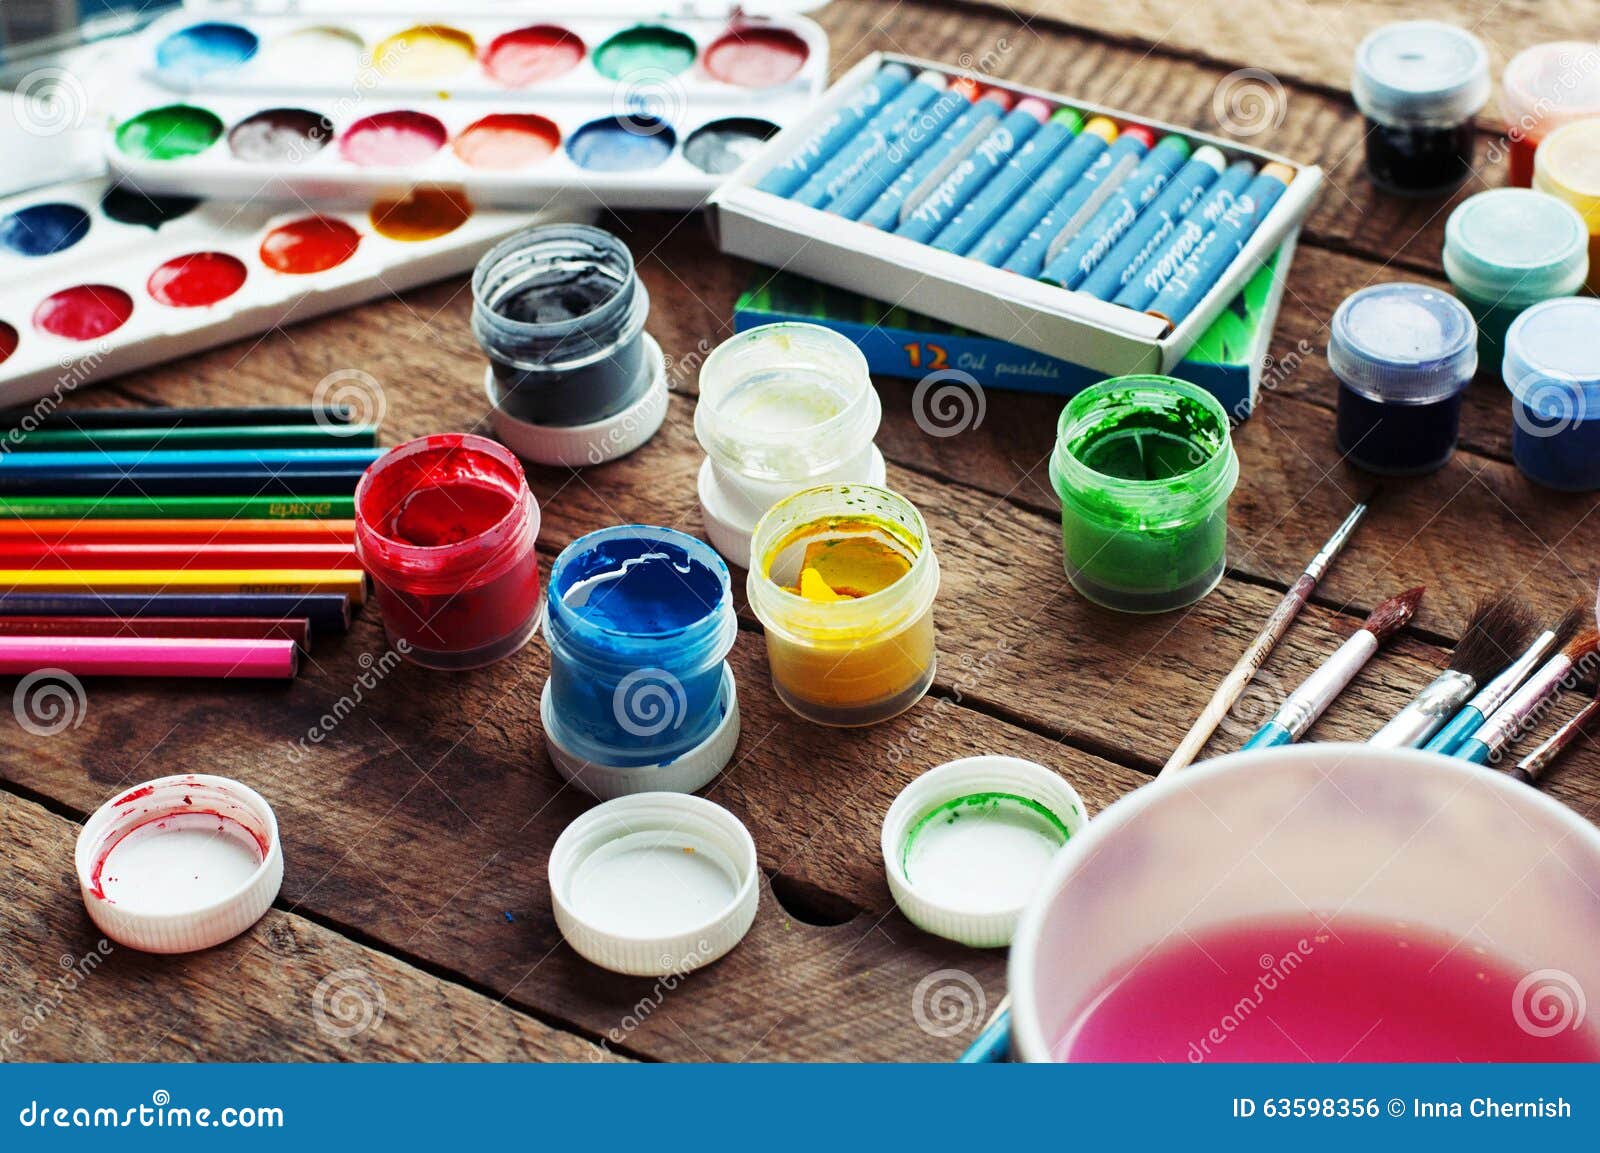 art of painting. paint buckets on wood background. different paint colors painting on wooden background. painting set: brushes, pa